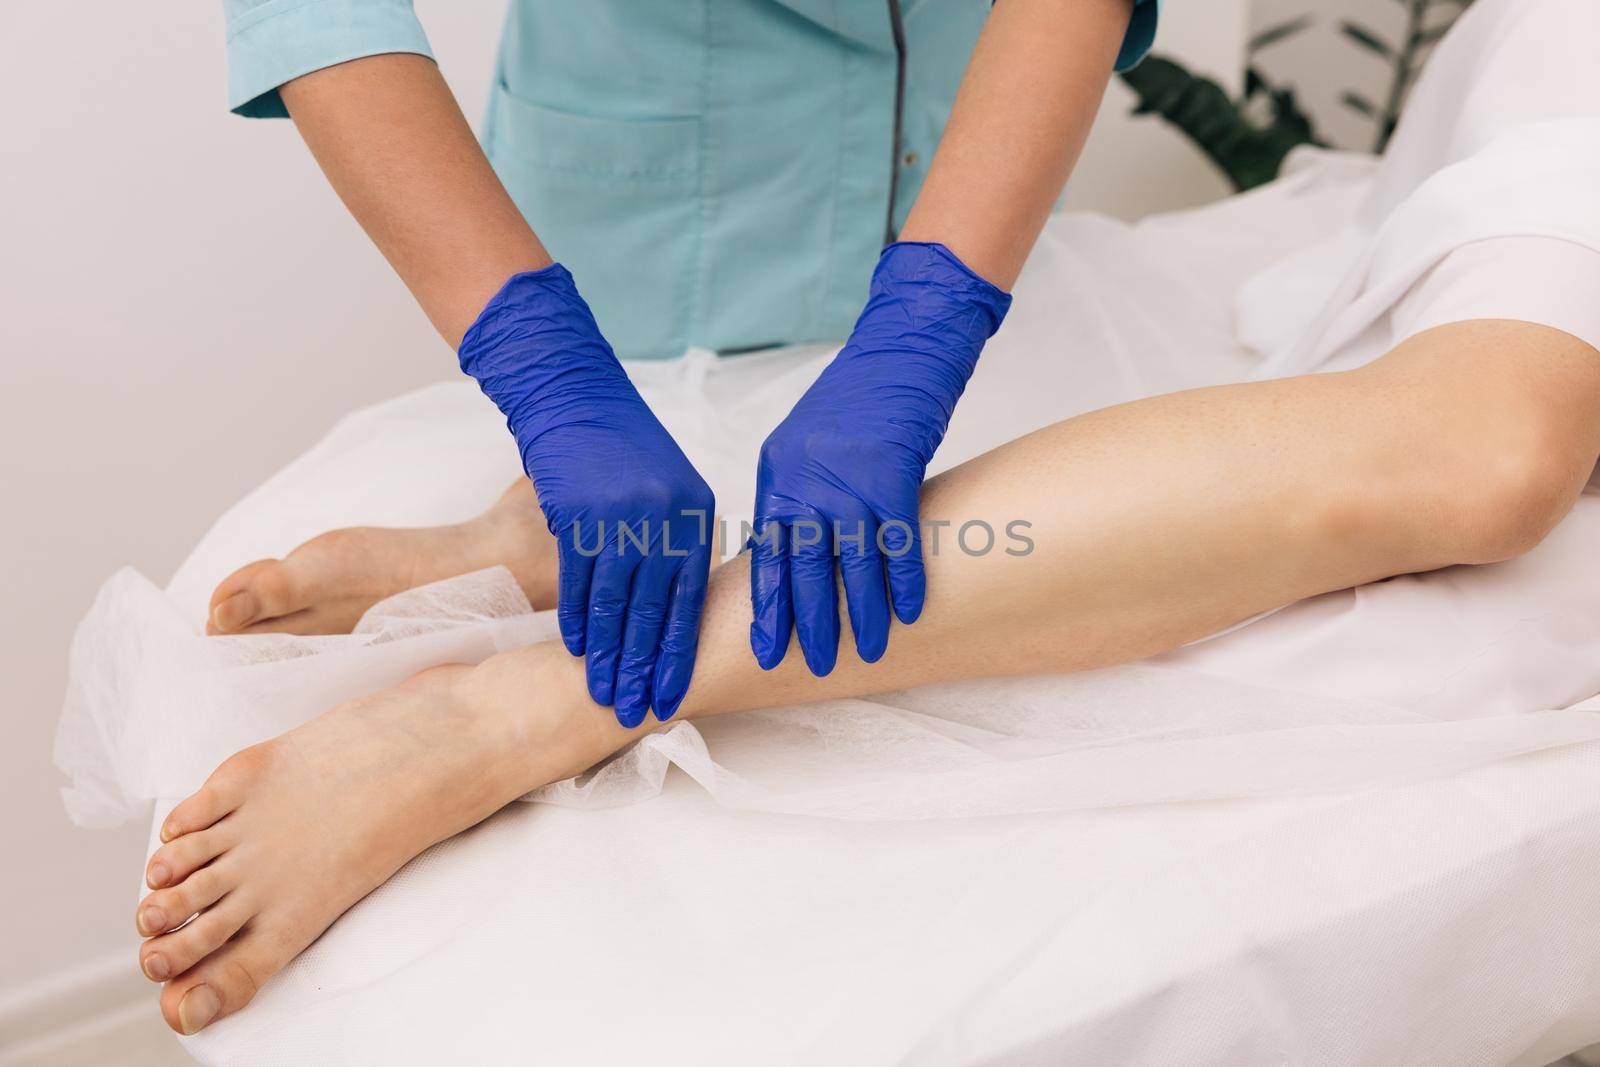 Physiotherapist worker woman assisting physical medical exercise recovery after injuries. Rehabilitation. Treatment Healthcare Concept by uflypro